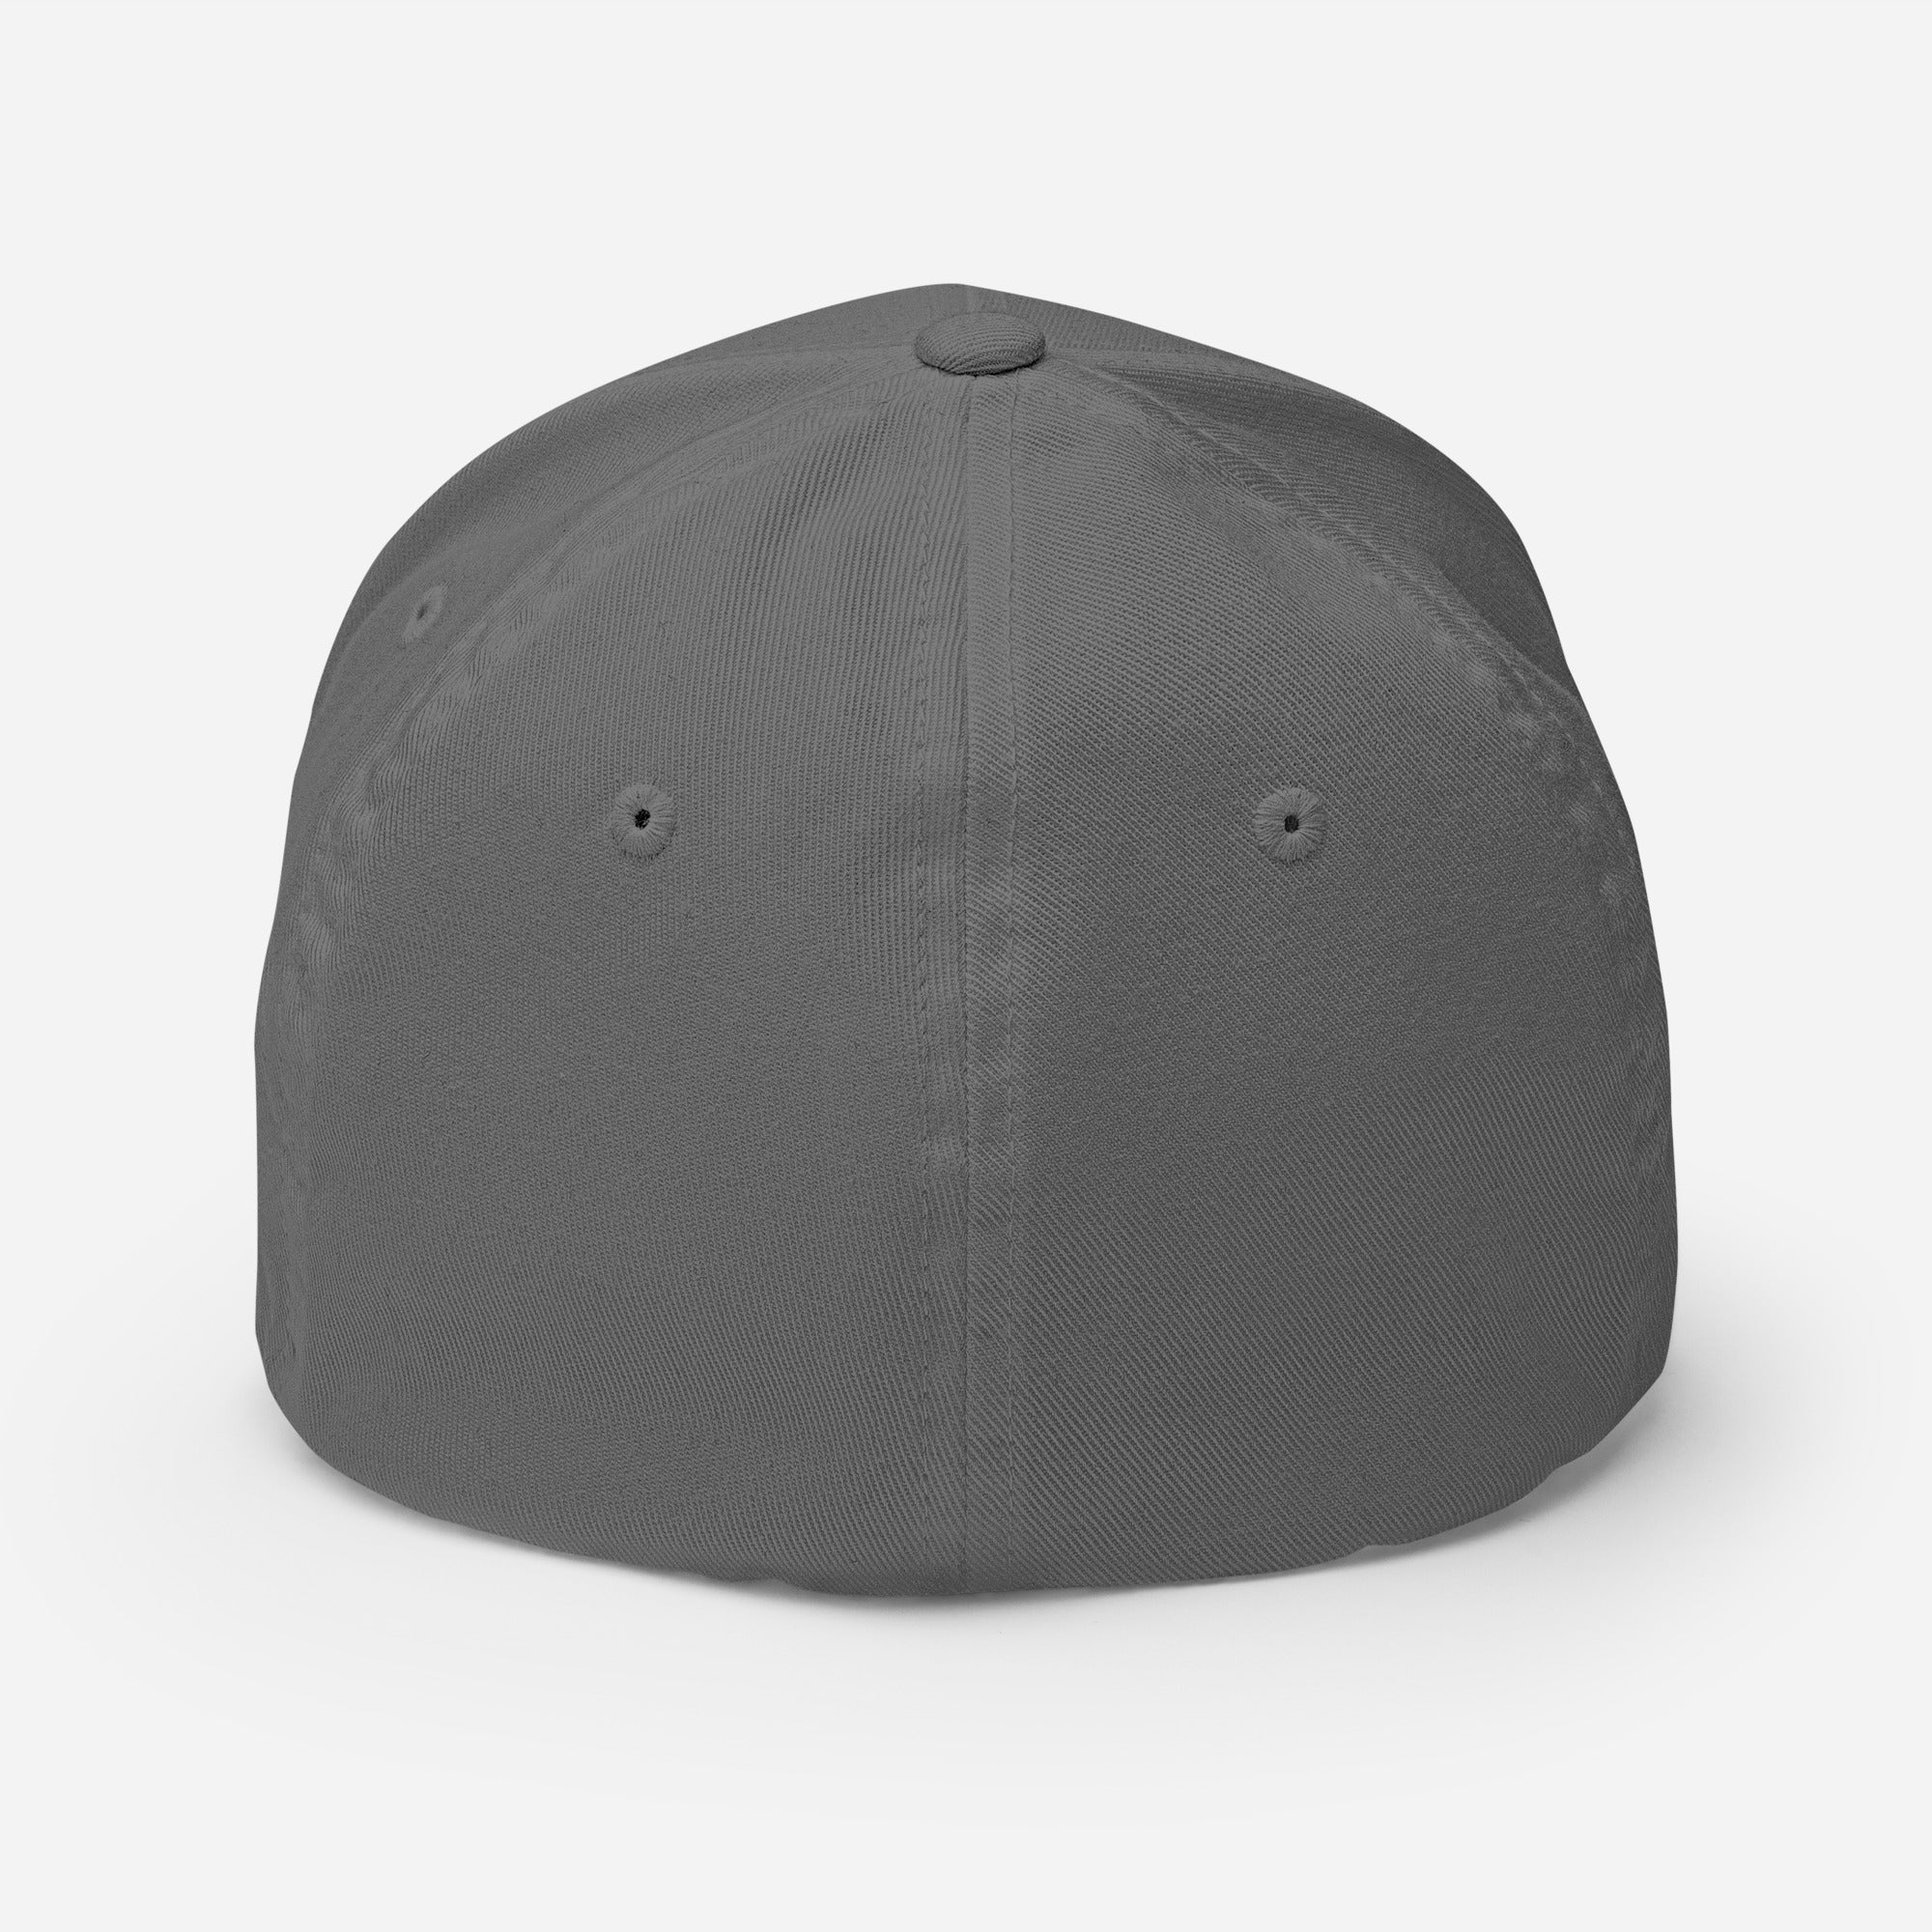 Provision Promise Infinity Heart Structured Flexfit Twill Cap